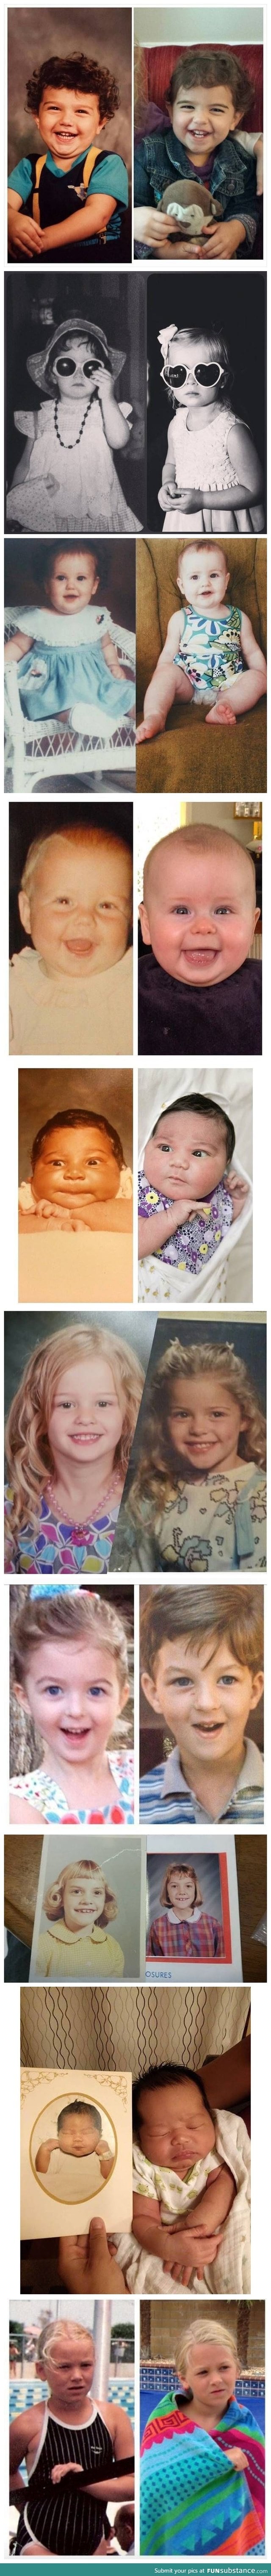 Parents Who Looked Exactly Like Their Kids When They Were Younger...